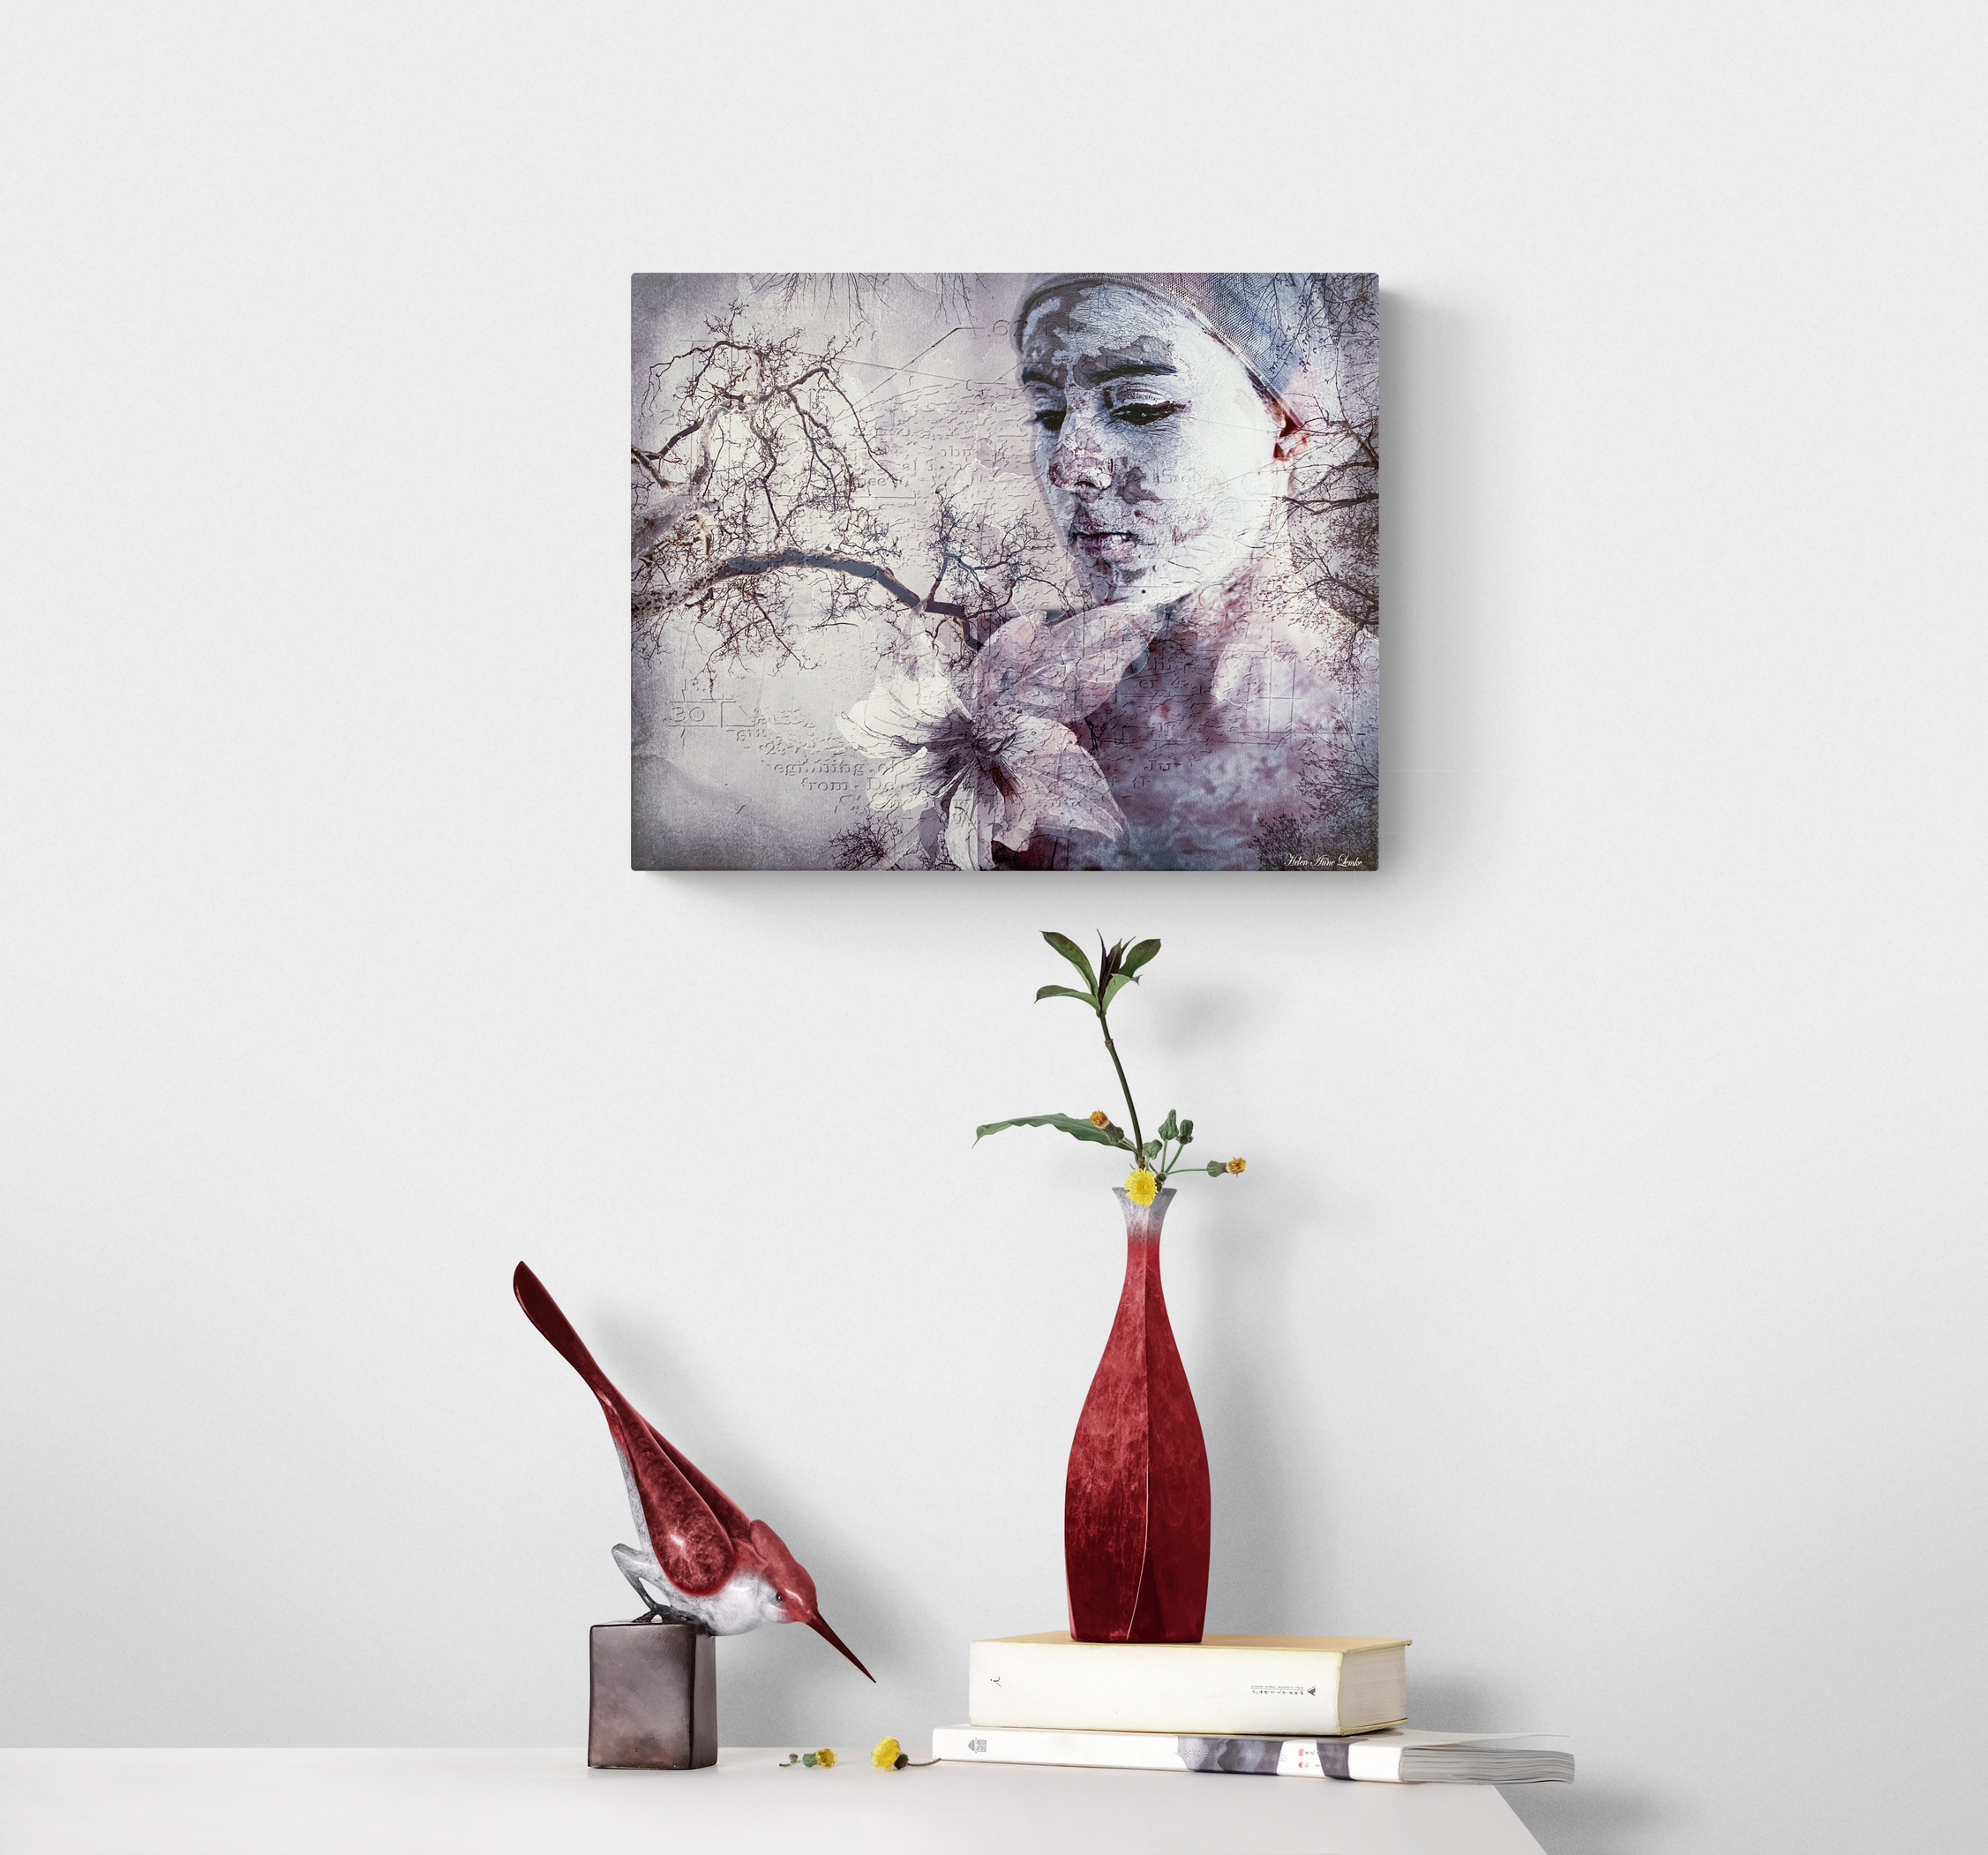 Unique collection of home decor with "Pondering" by Helen Anne Lemke.